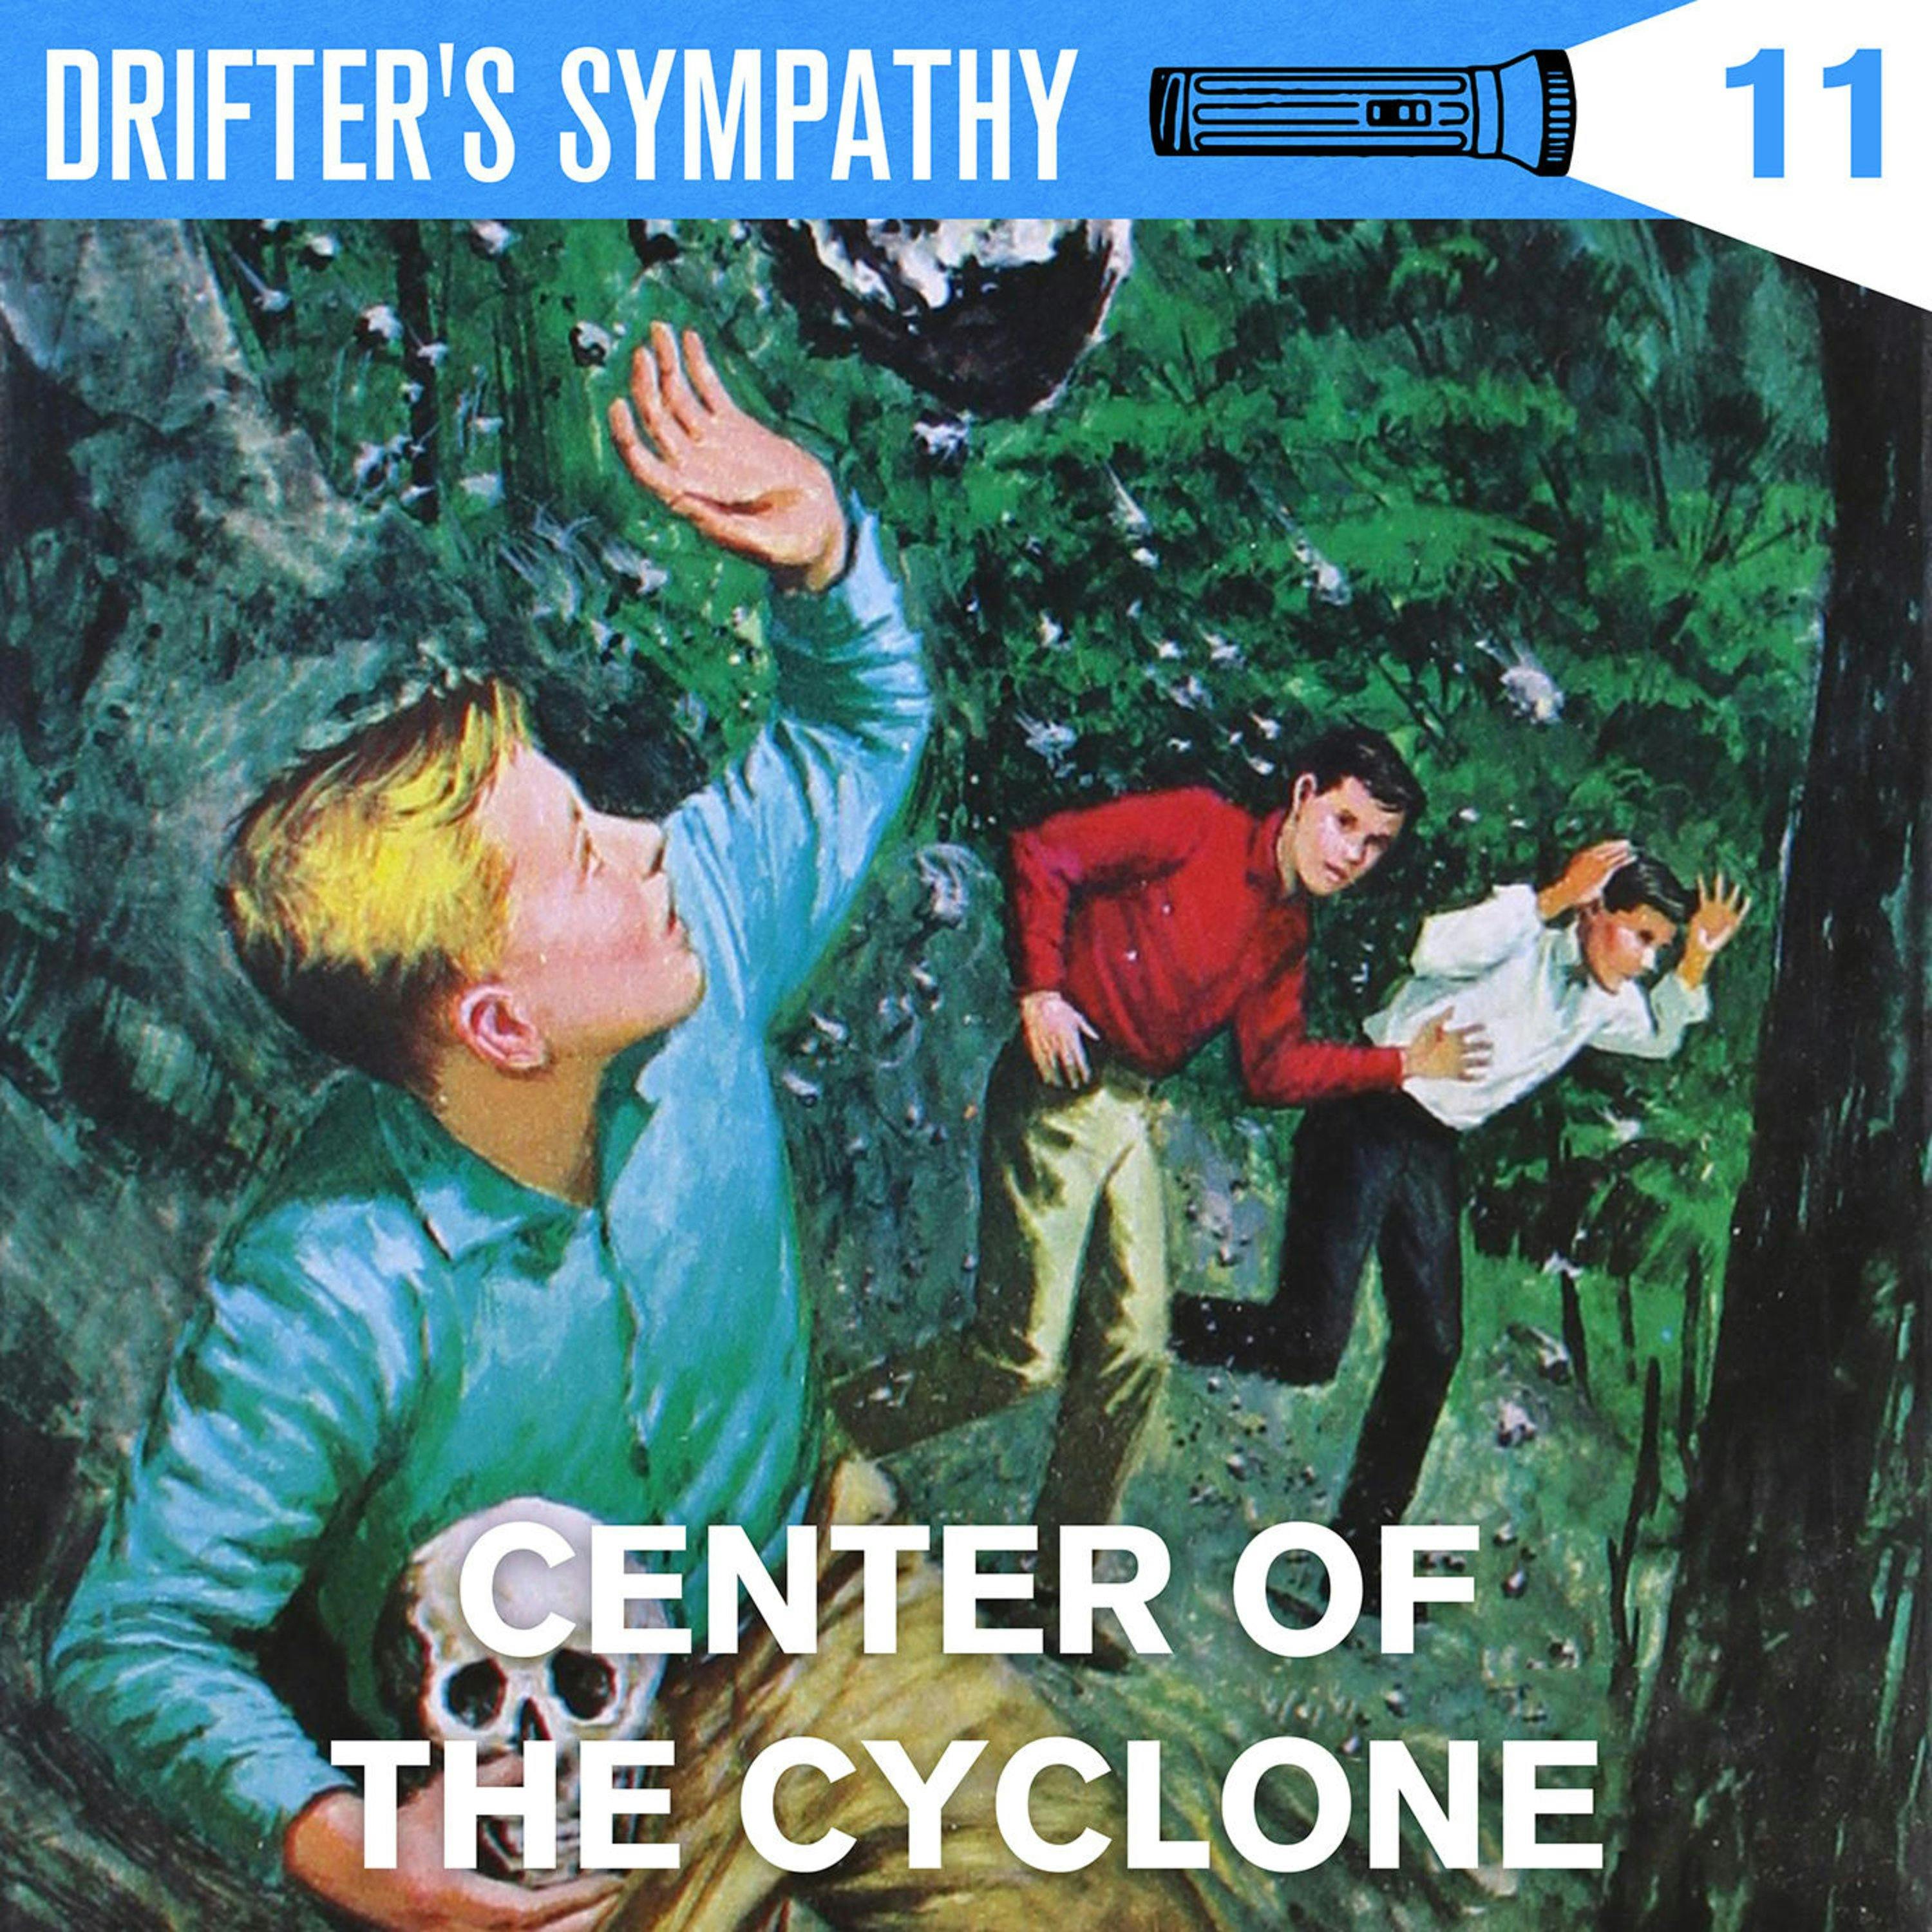 CENTER OF THE CYCLONE